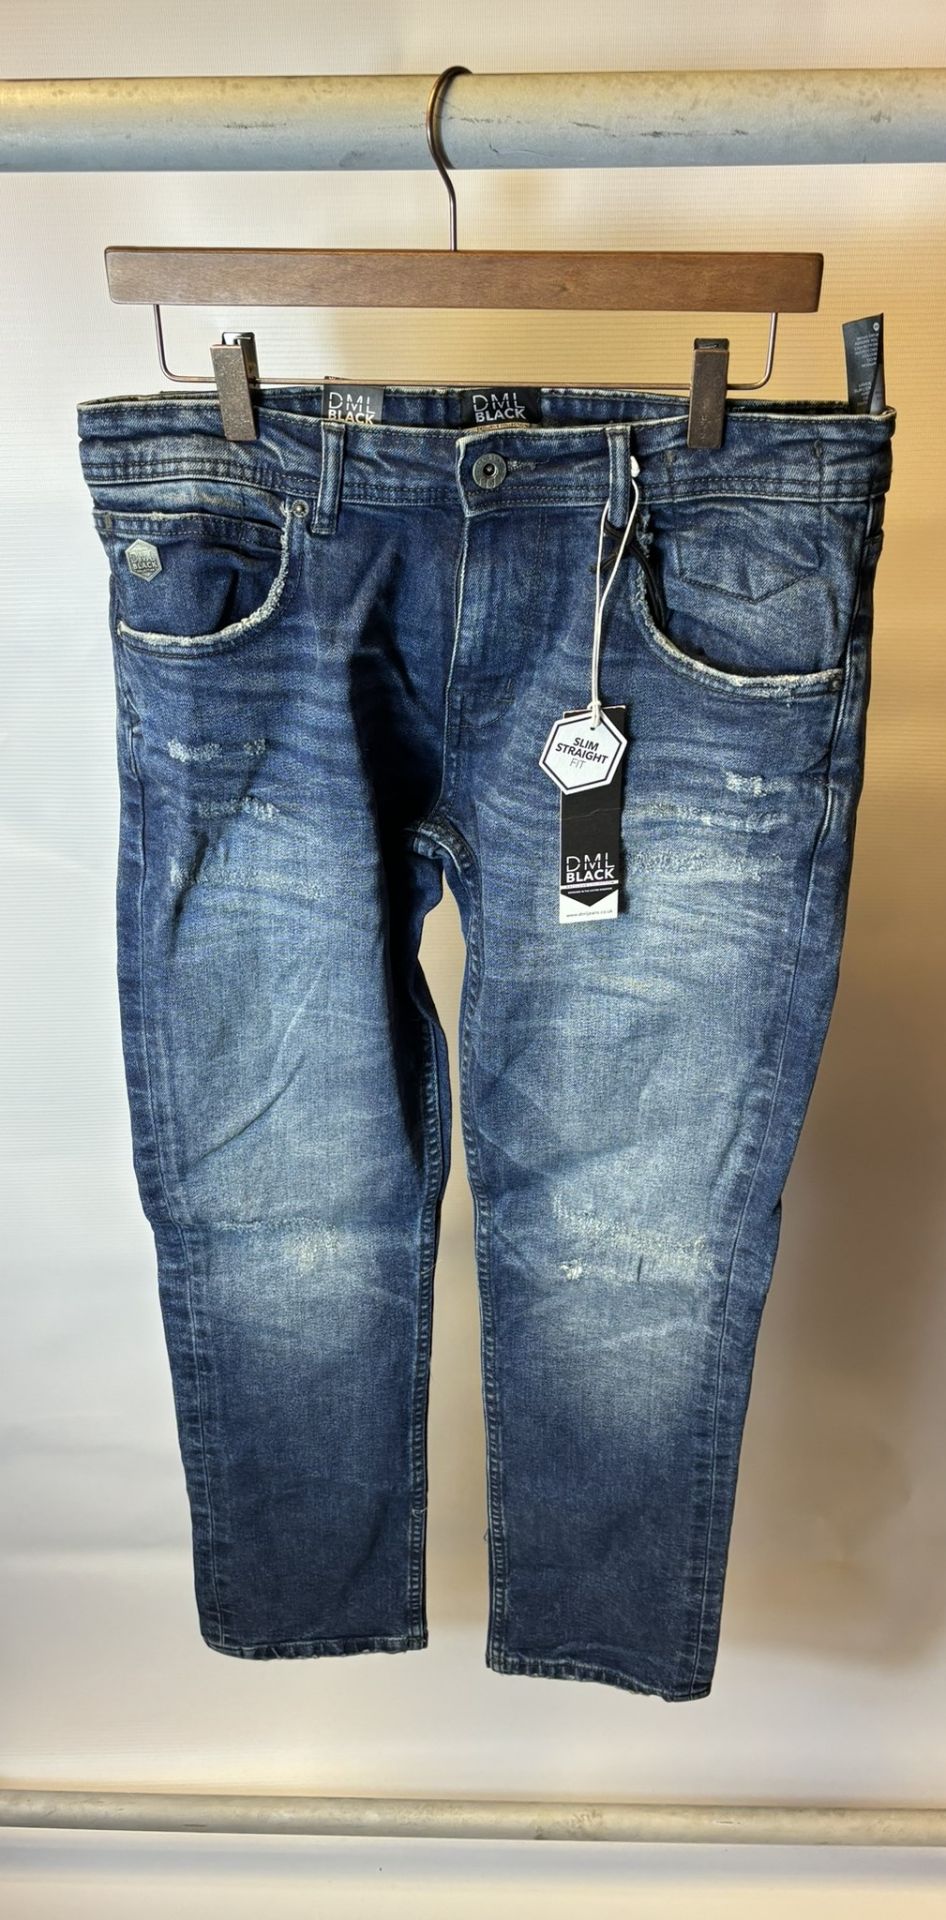 13 x Pairs Of various Sized DML Jeans Prophecy & Voyage Blue Jeans - Image 37 of 39